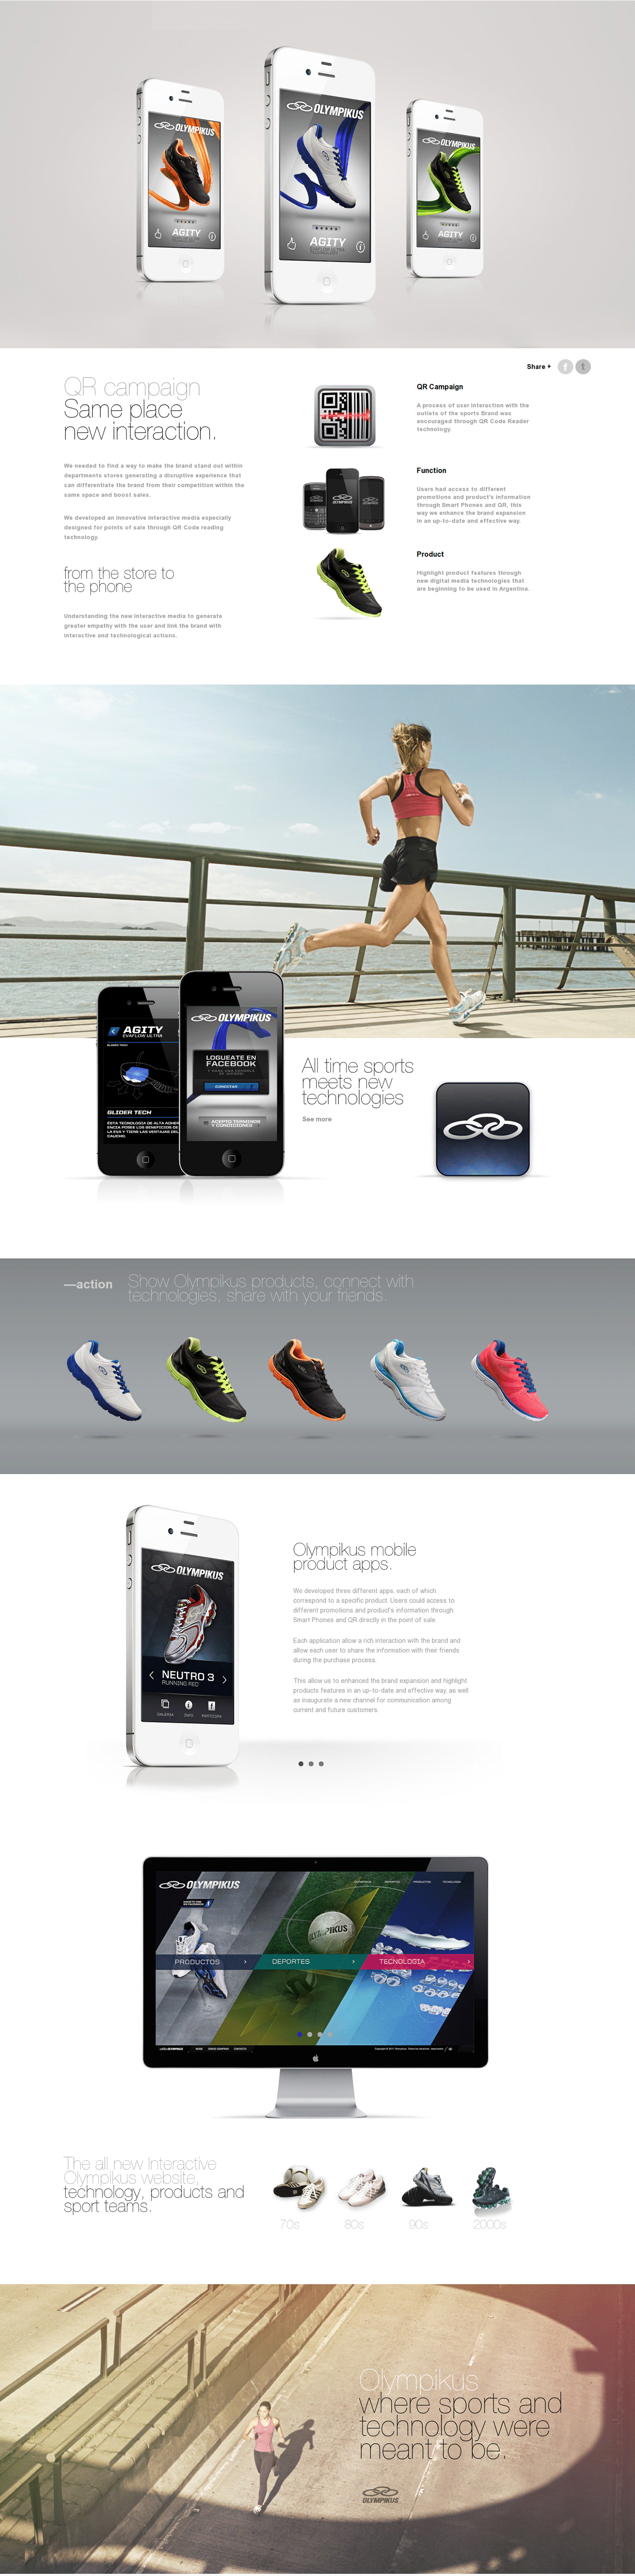 application mobile app sports shoes Snickers olympikus dhnn UI ux user experience Interface Mobile app shoe